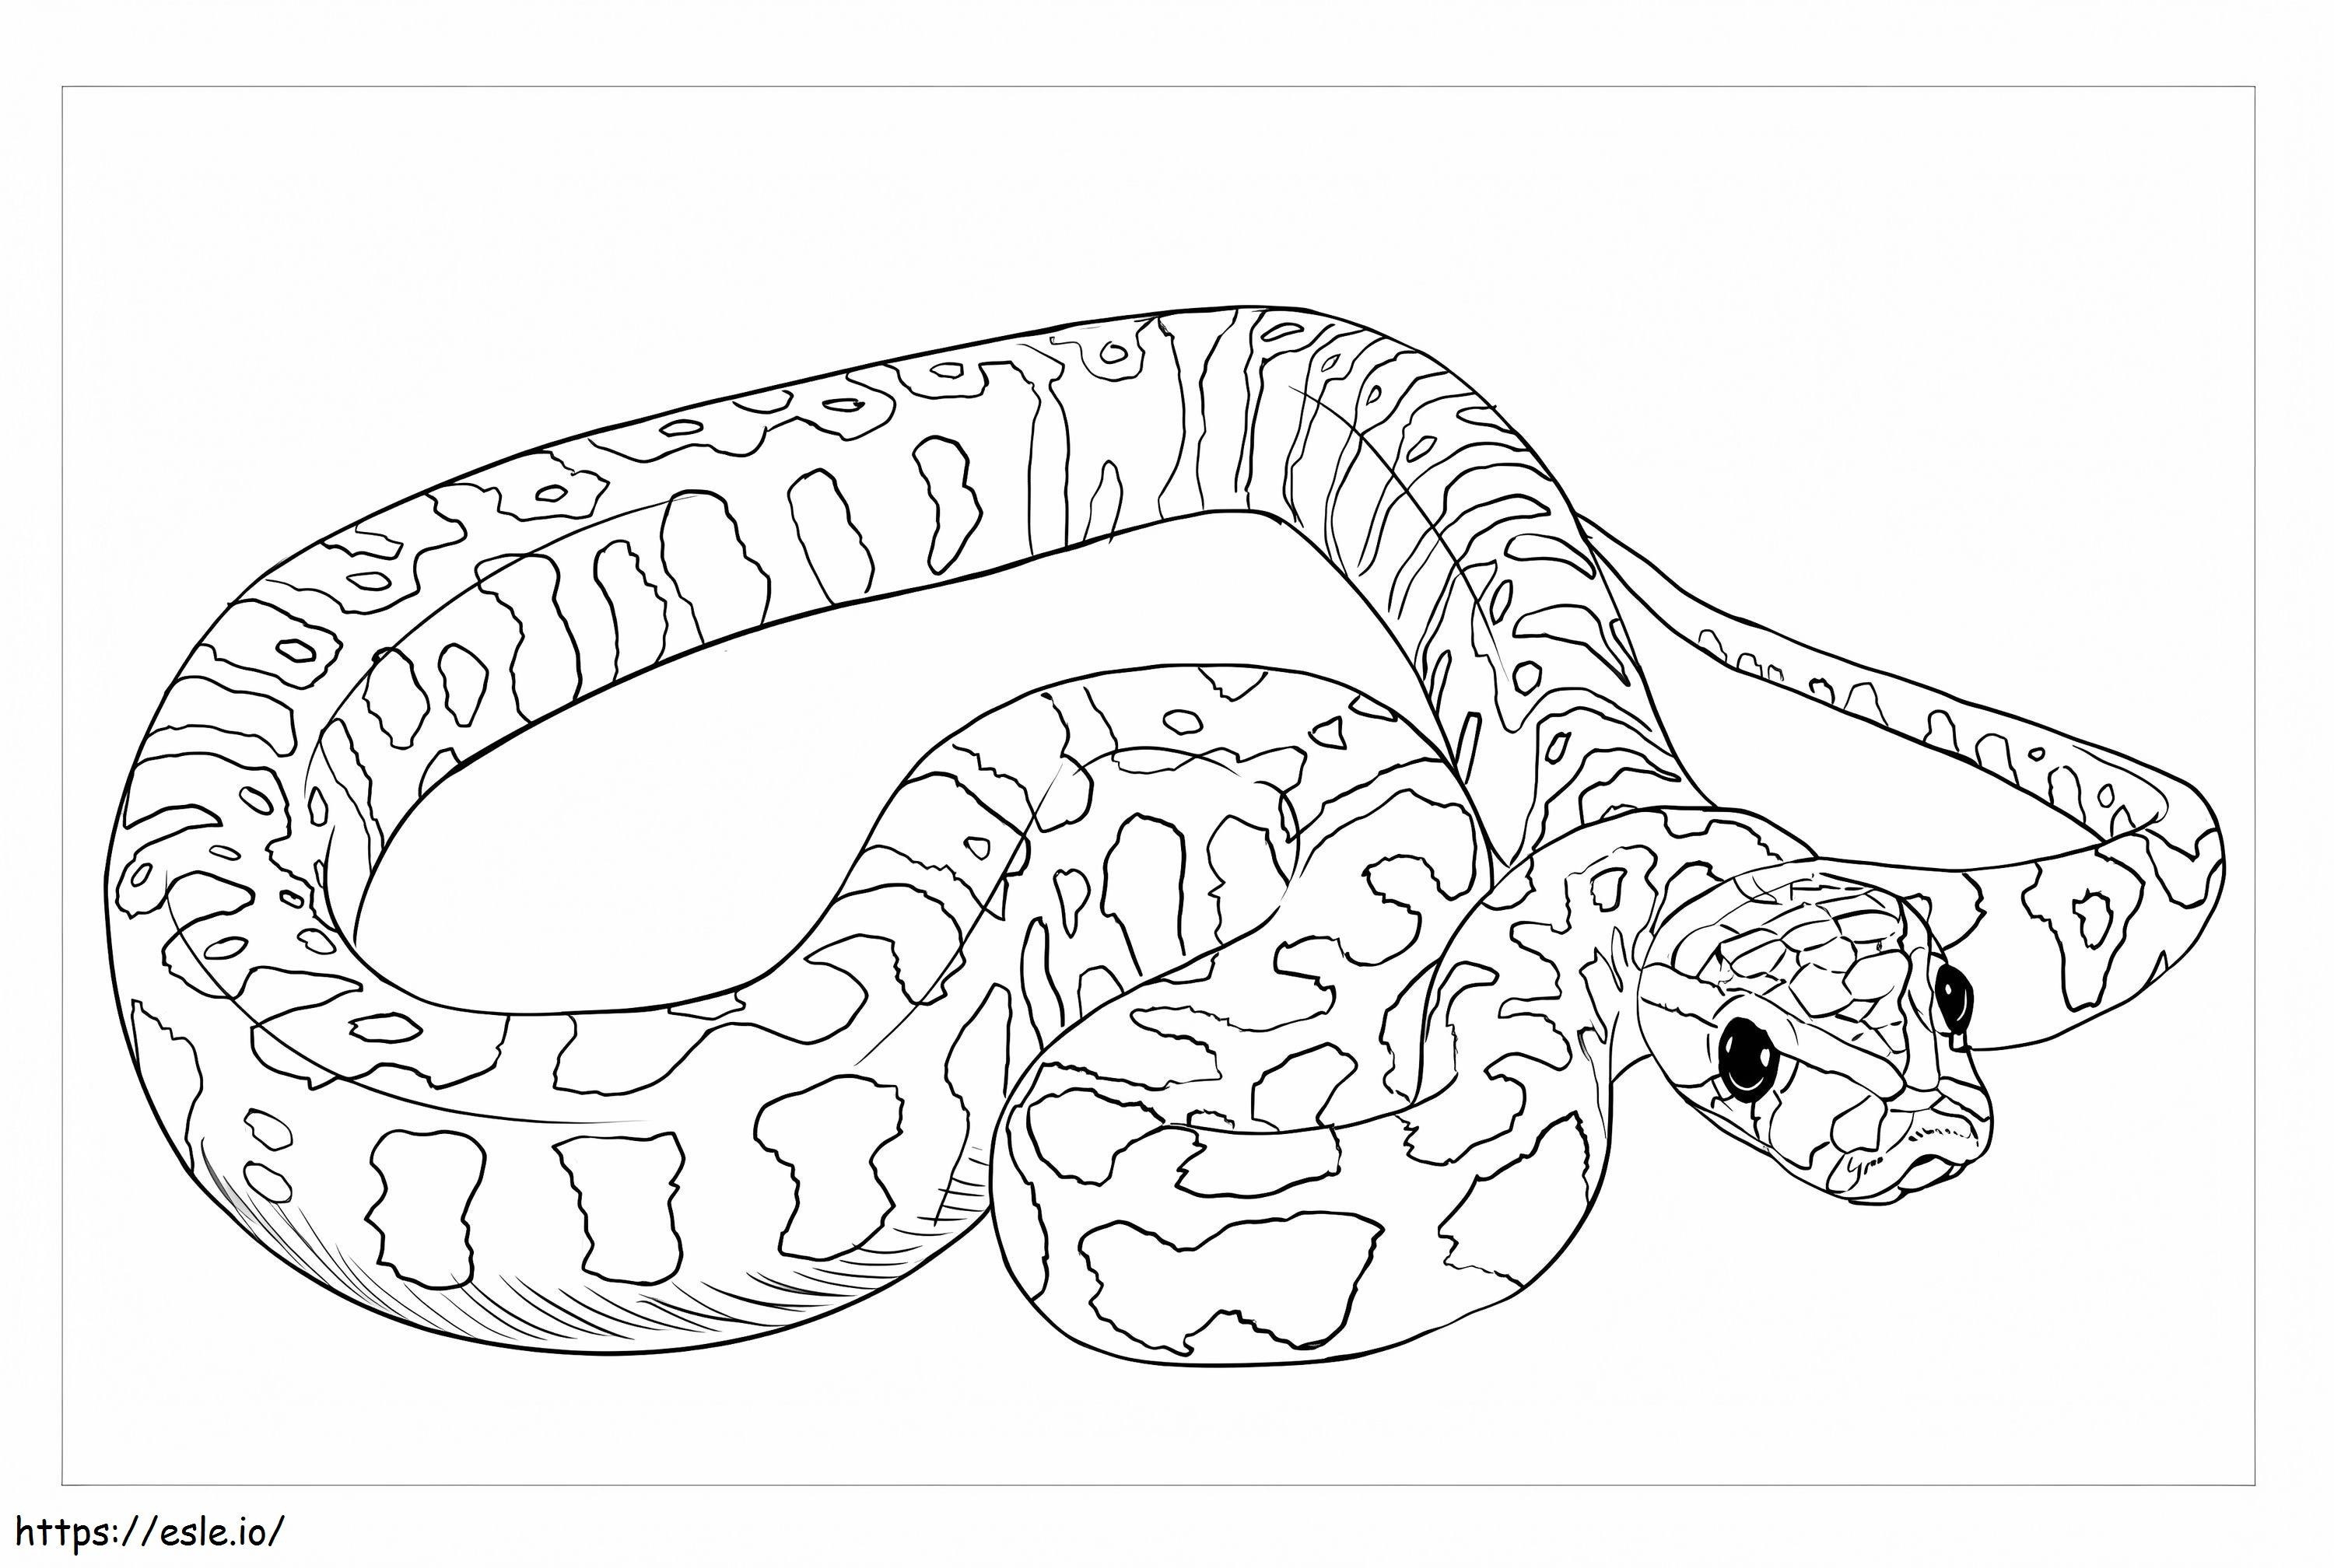 African Rock Python coloring page